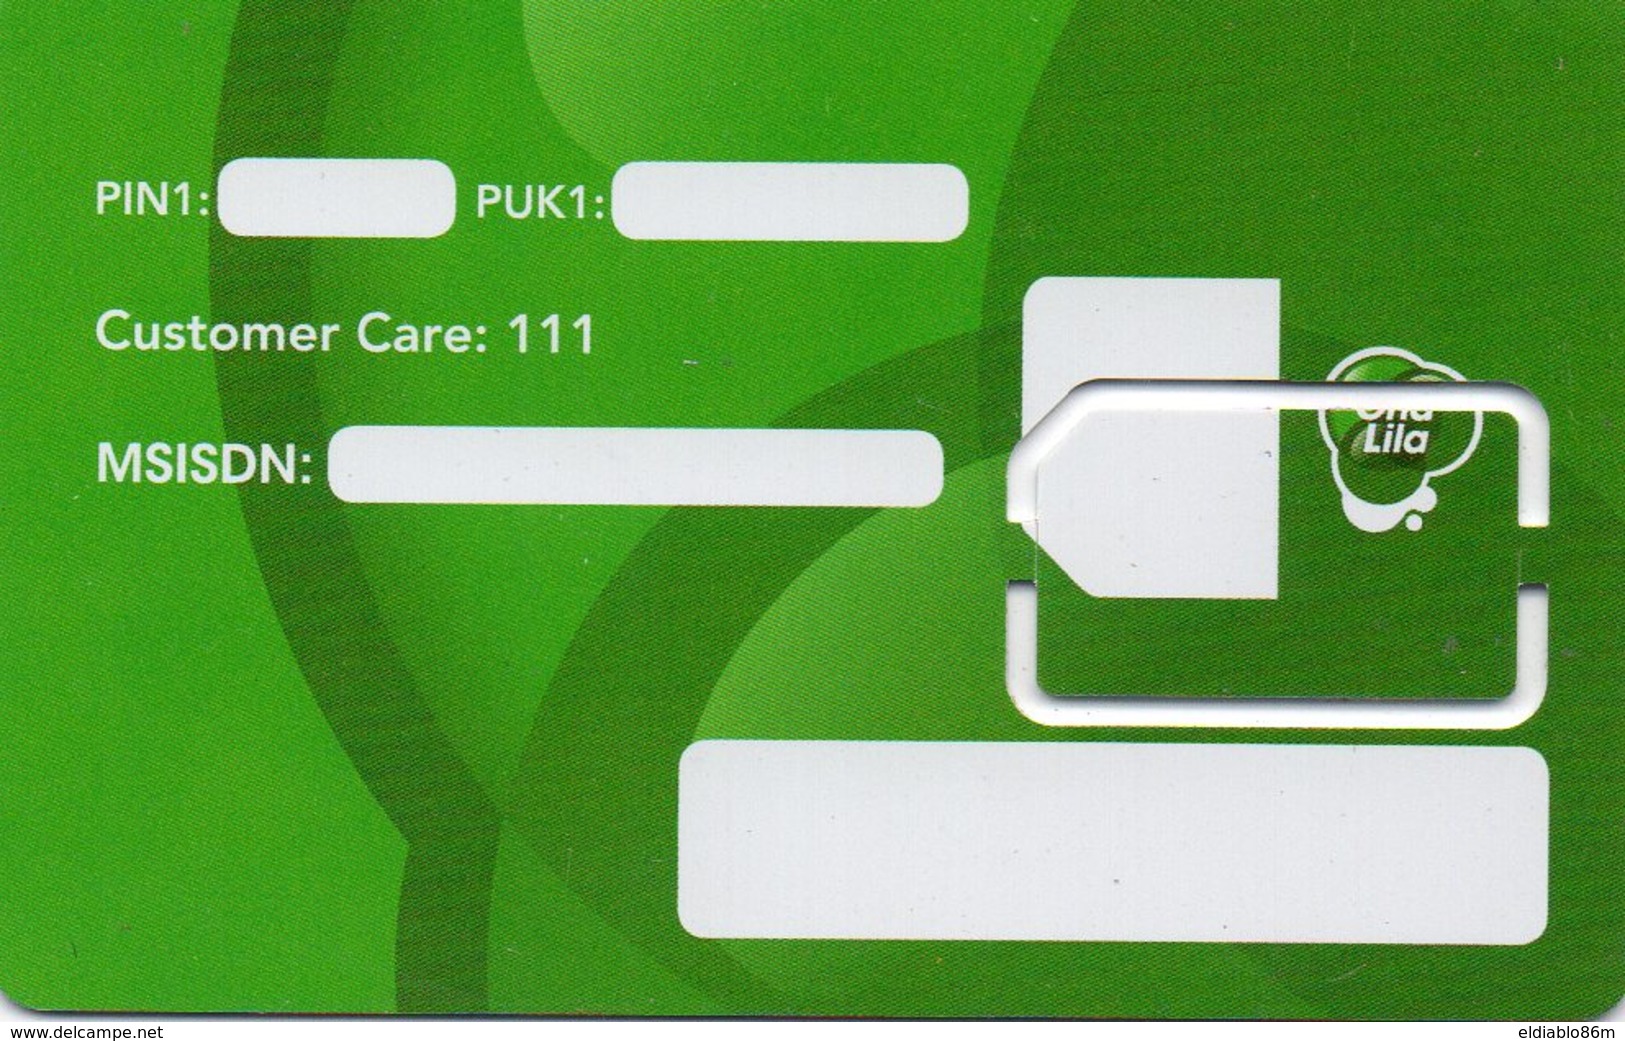 ZAMBIA - TEST PROOF CARD - GSM CARD ZAMTEL WITH ERROR CHIP - RRR - Sambia